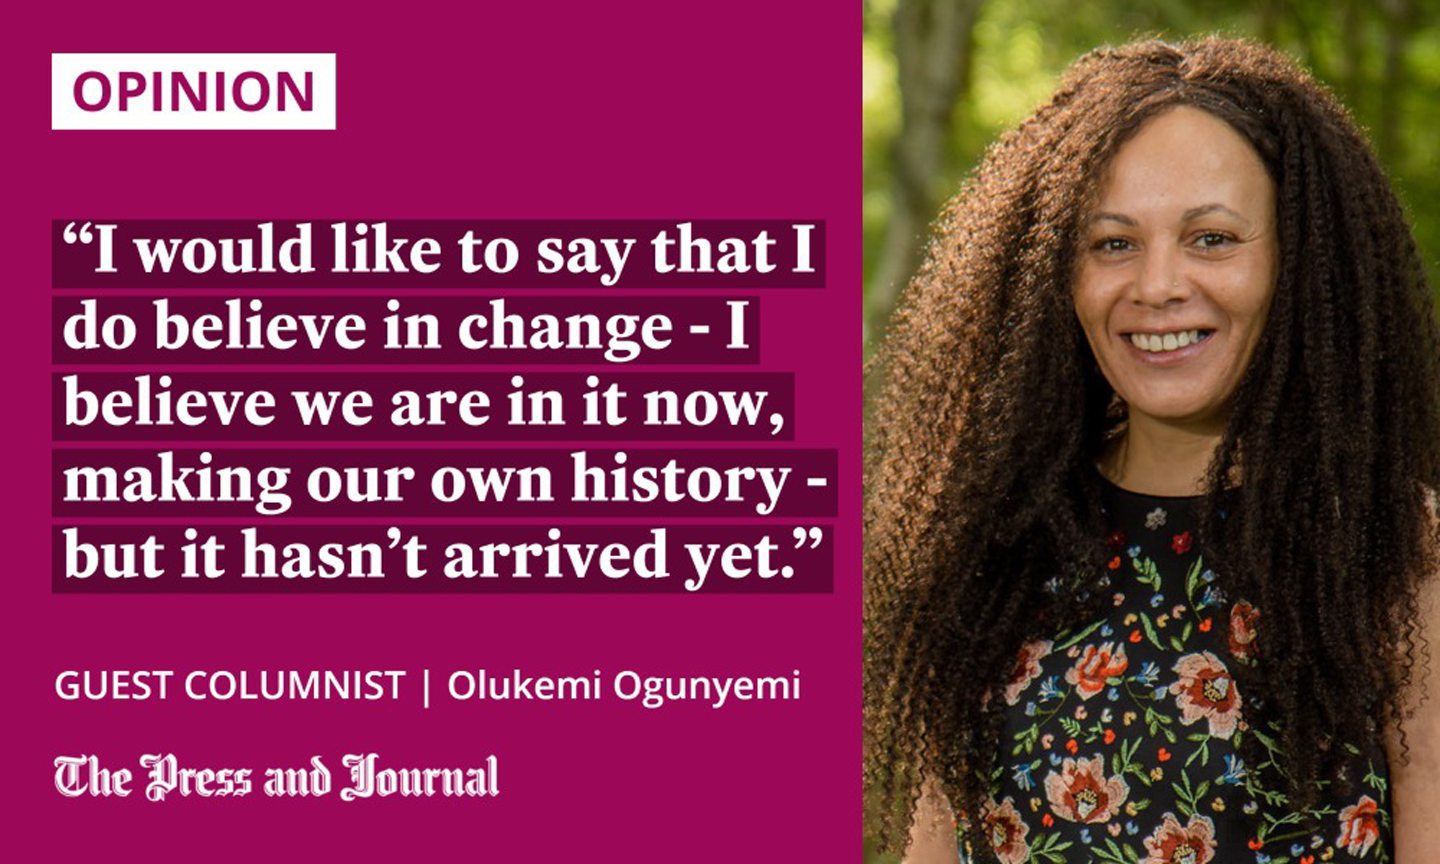 Guest Columnist, Olukemi Ogunyemi, speaks about unconscious racism: "I would like to say that I do believe in change - I believe we are in it now, making our own history - but it hasn’t arrived yet."